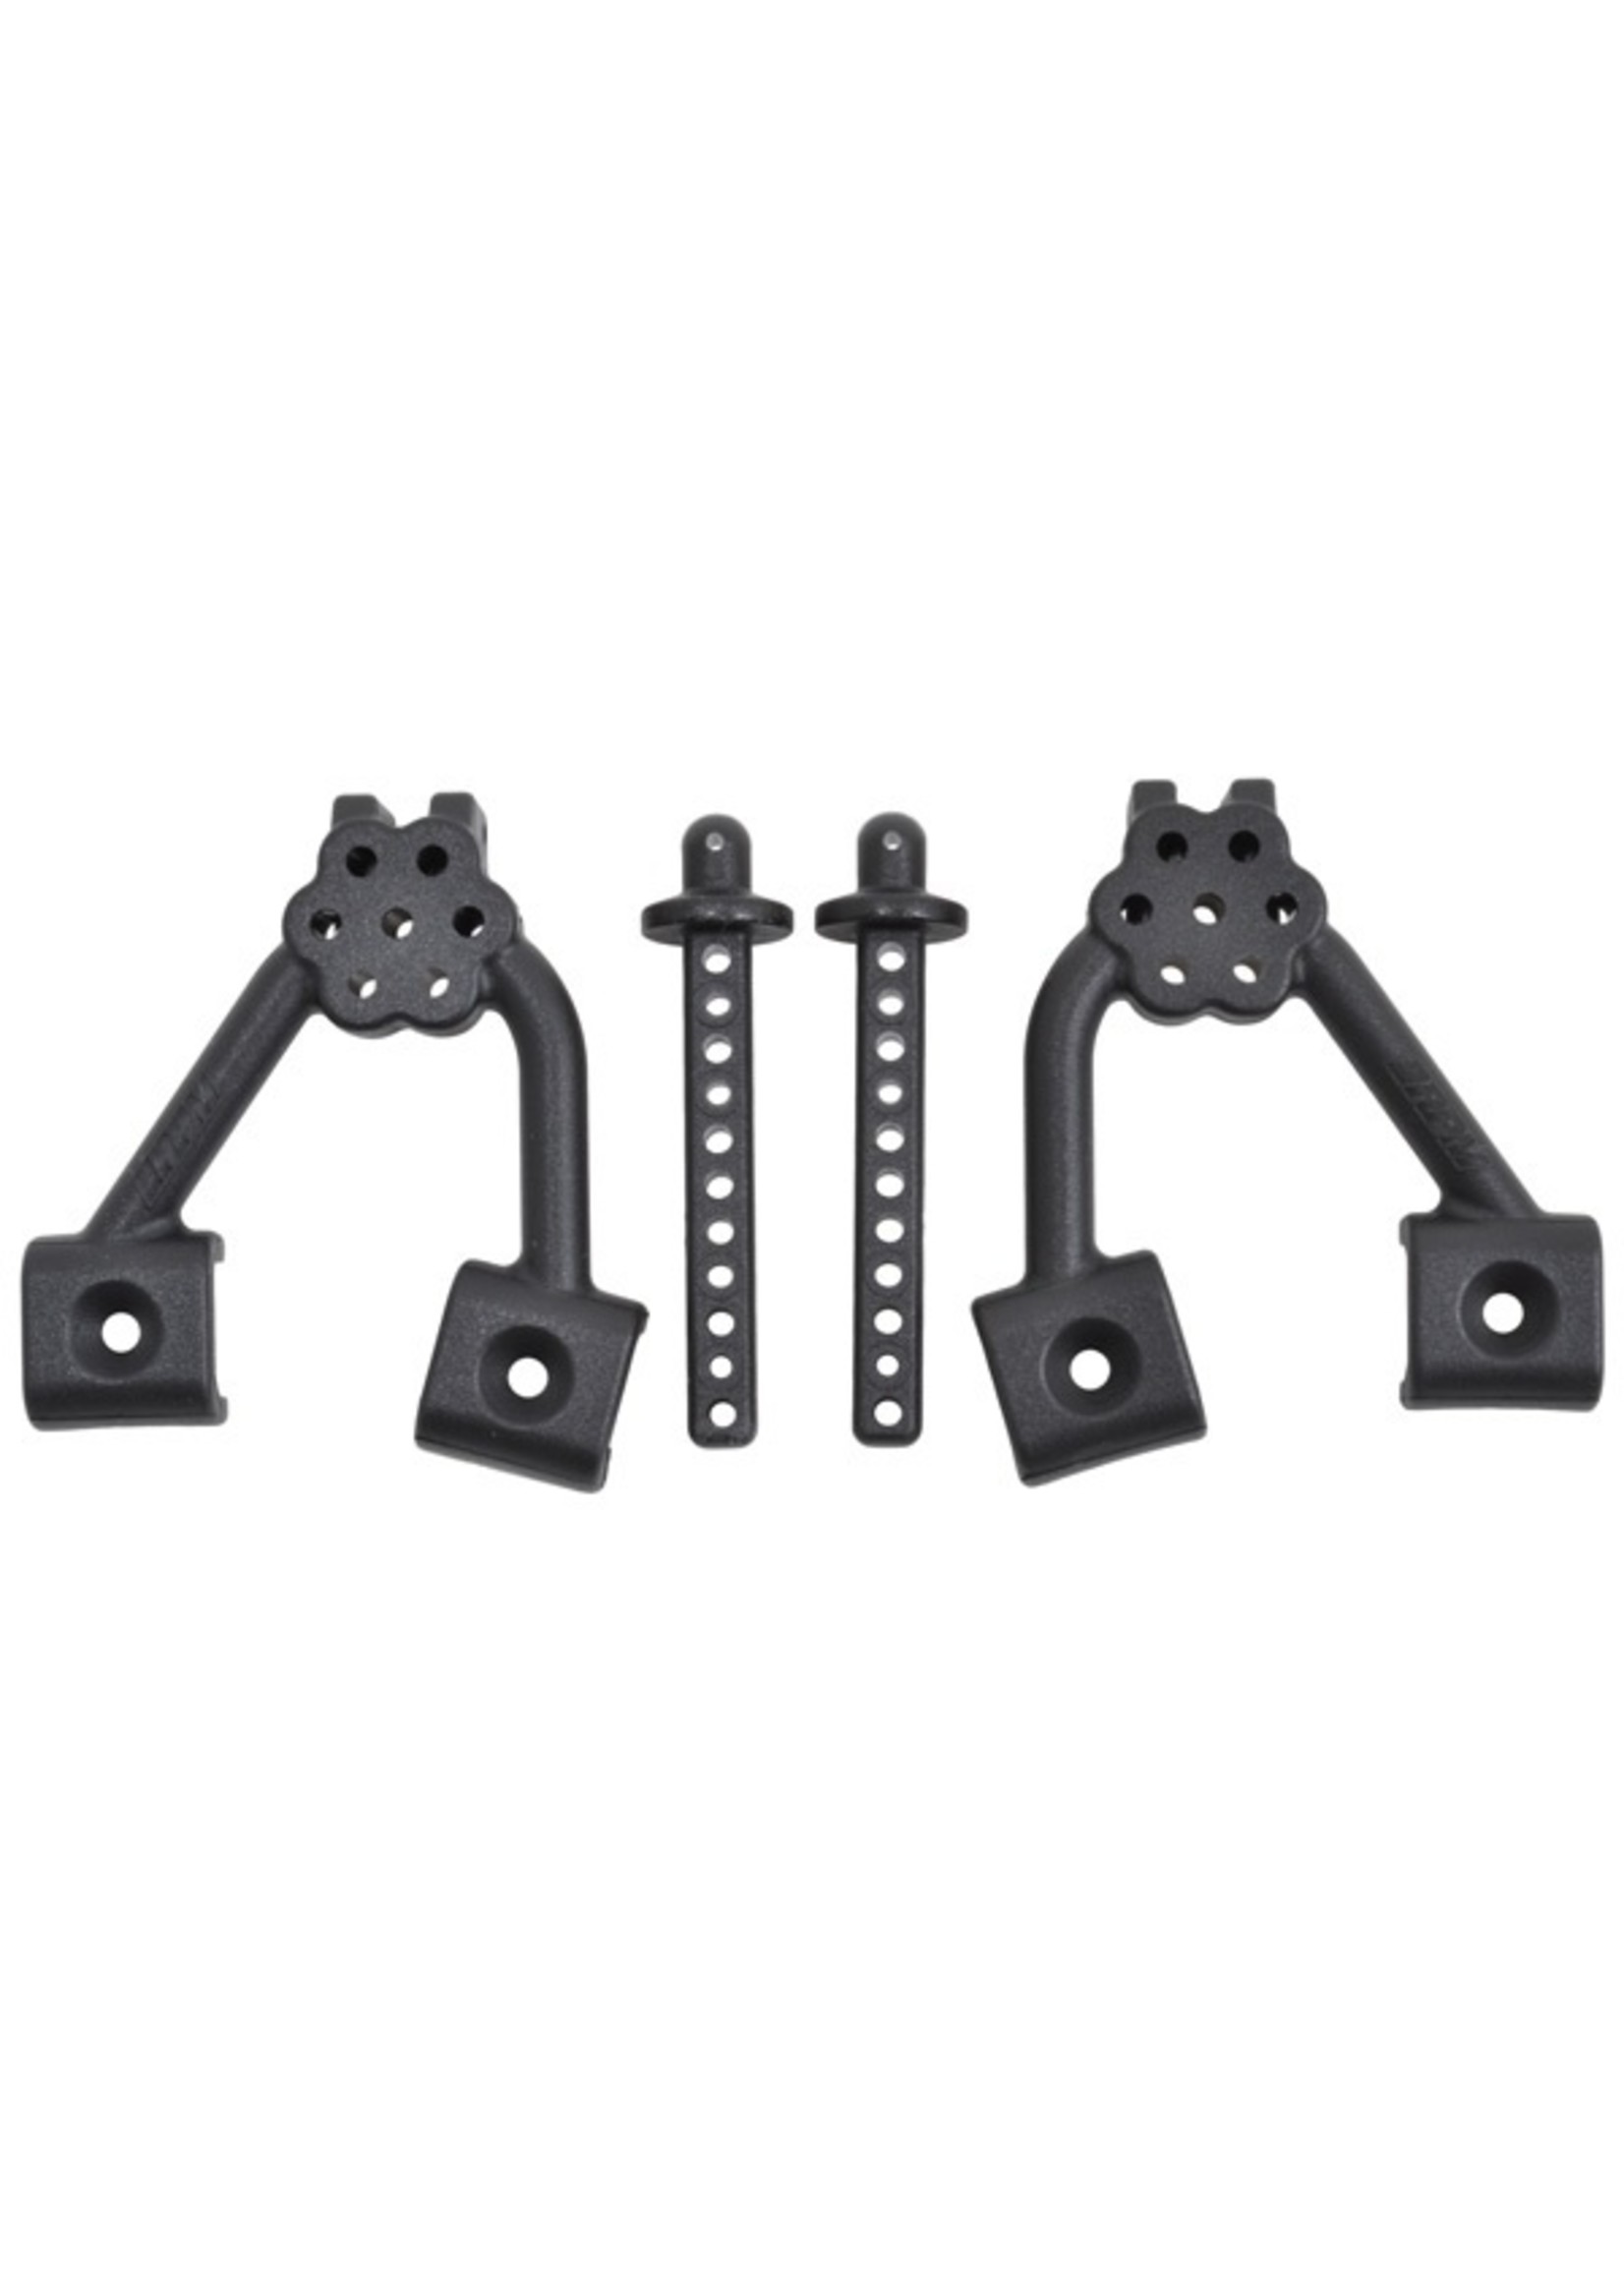 RPM 70642 - Front Shock Hoops and Body Mounts for Axial SCX10